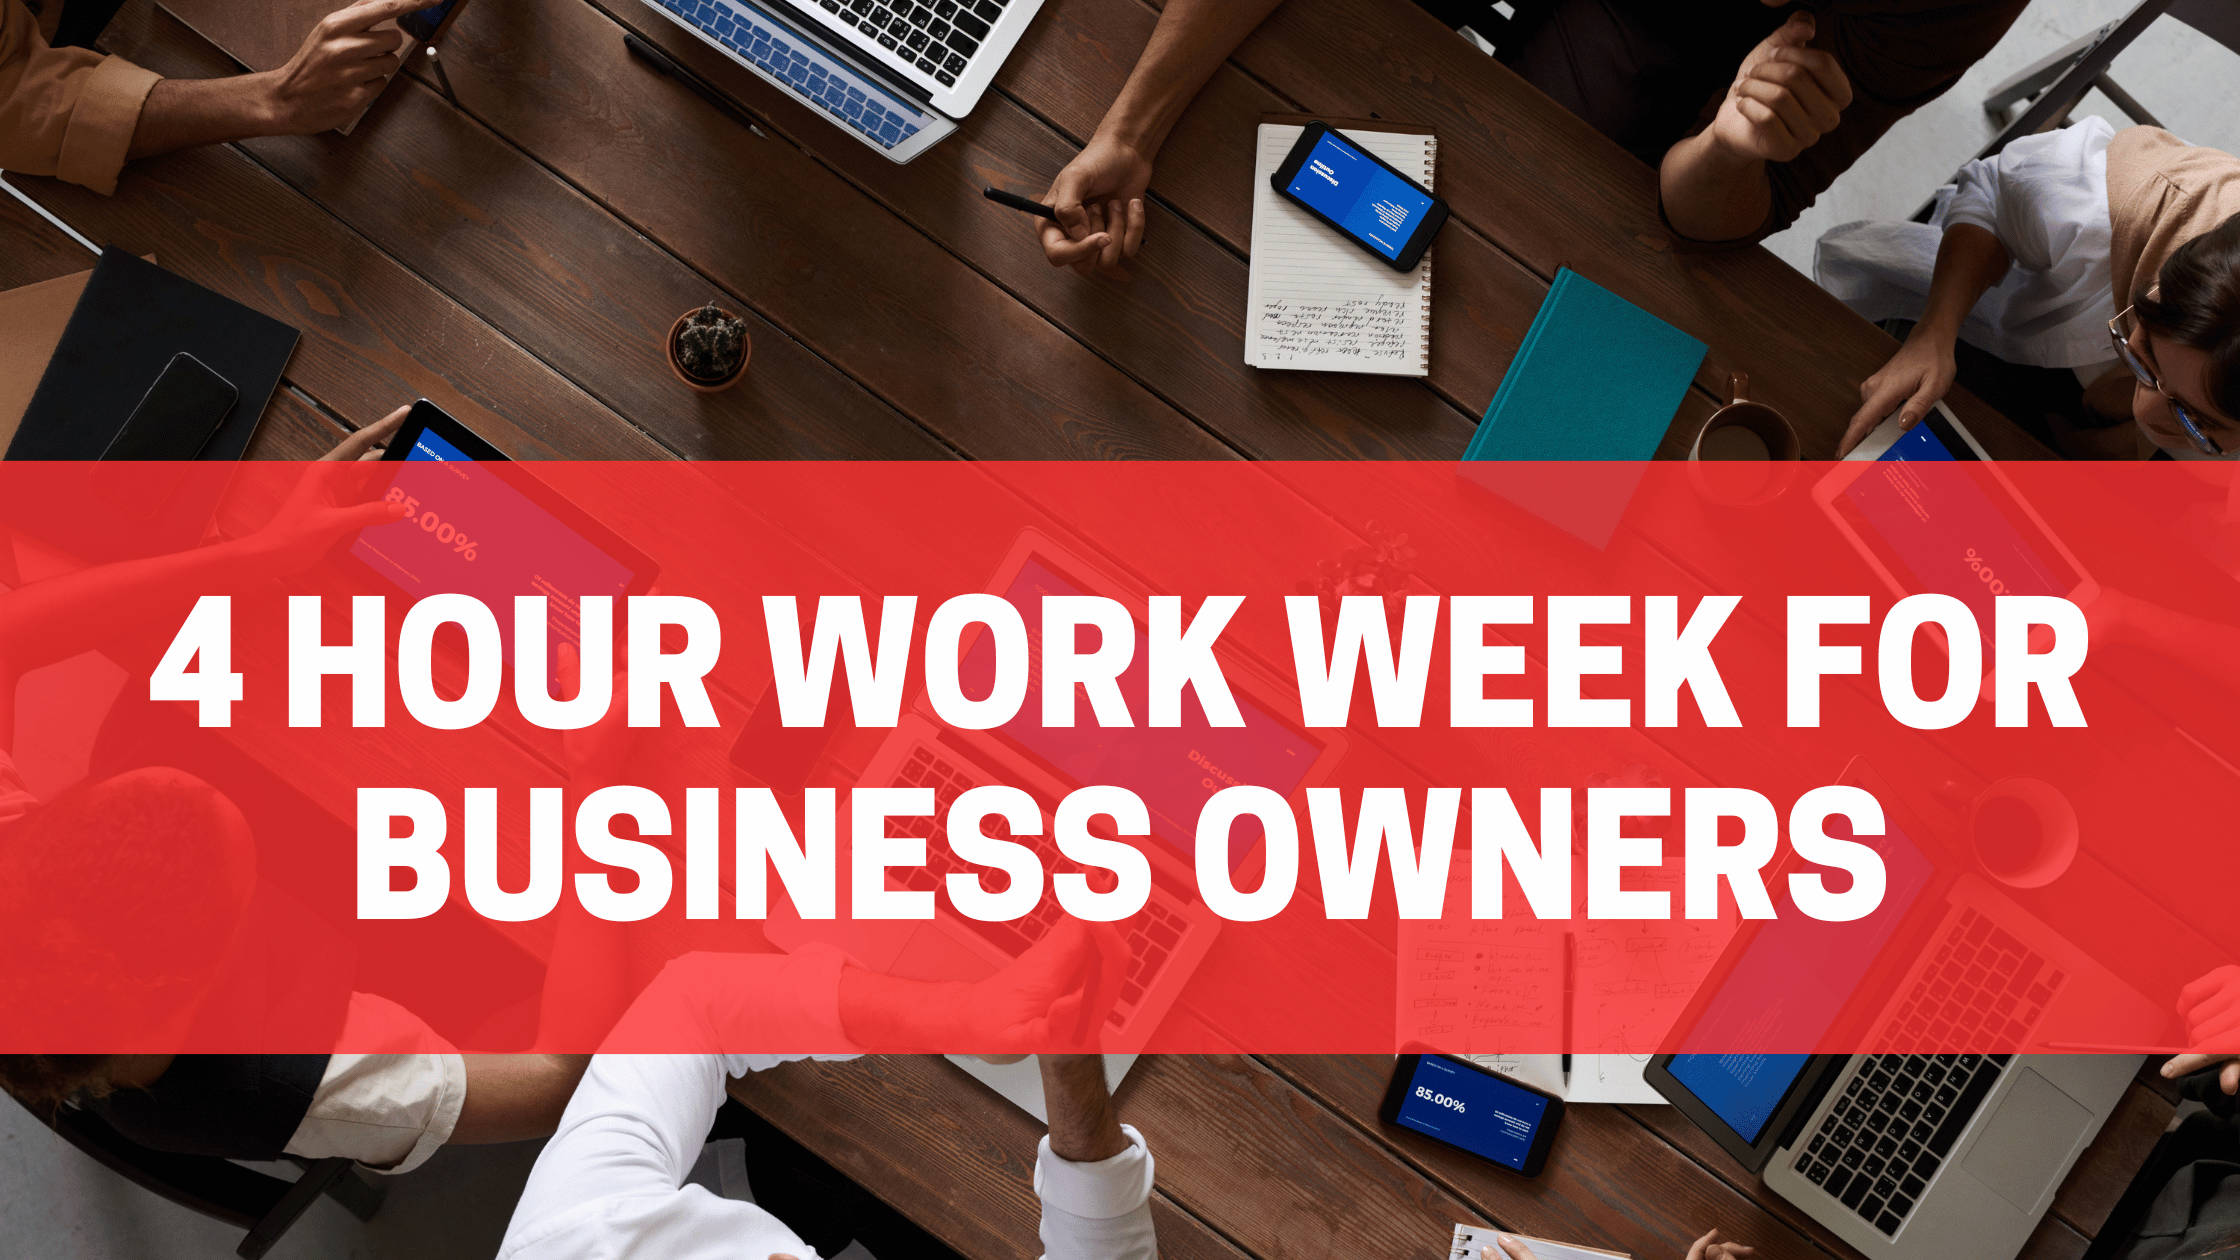 The 4-Hour Work Week: Realizing the Dream with AI Automation for Small Business Owners